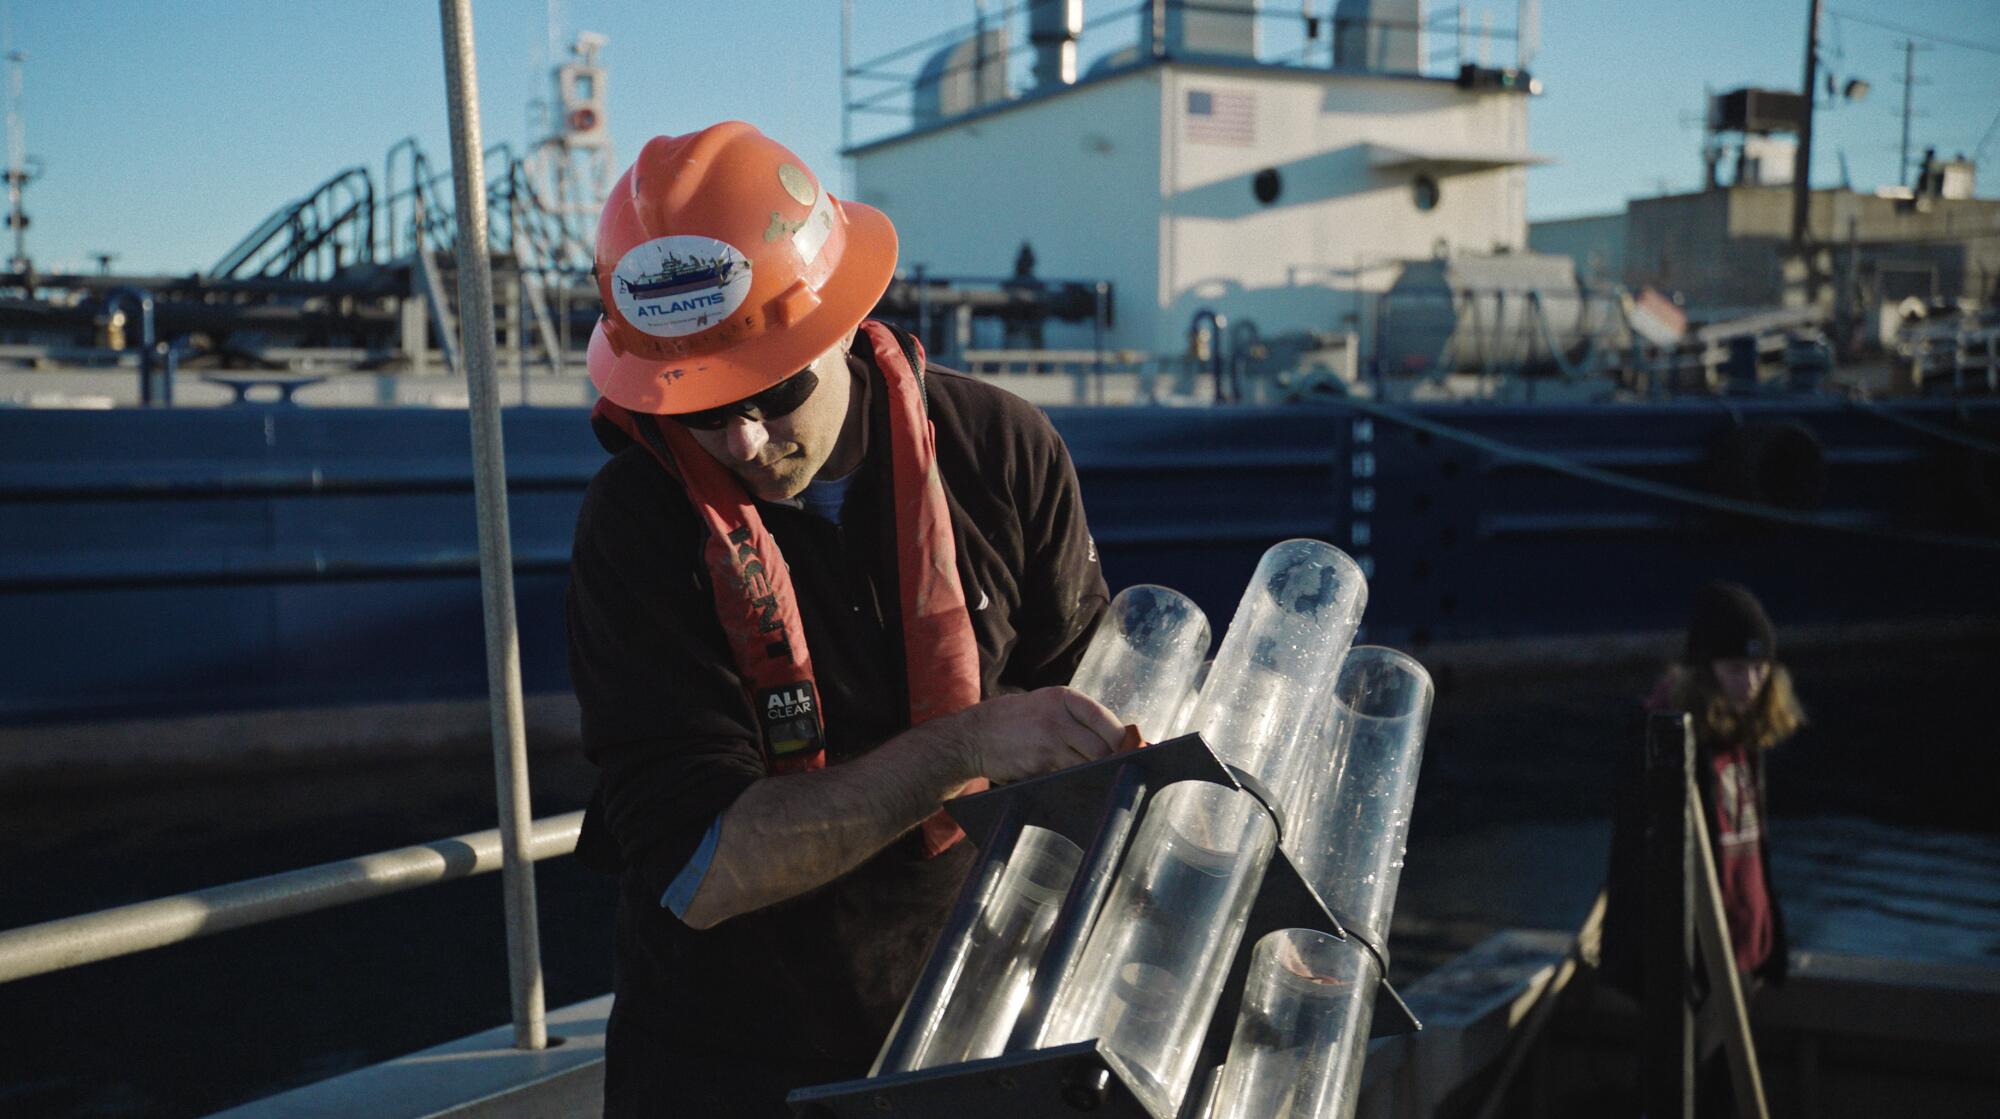 A man wearing an orange hard hat and life vest holds a device made of clear tubes while standing on the deck of a ship.